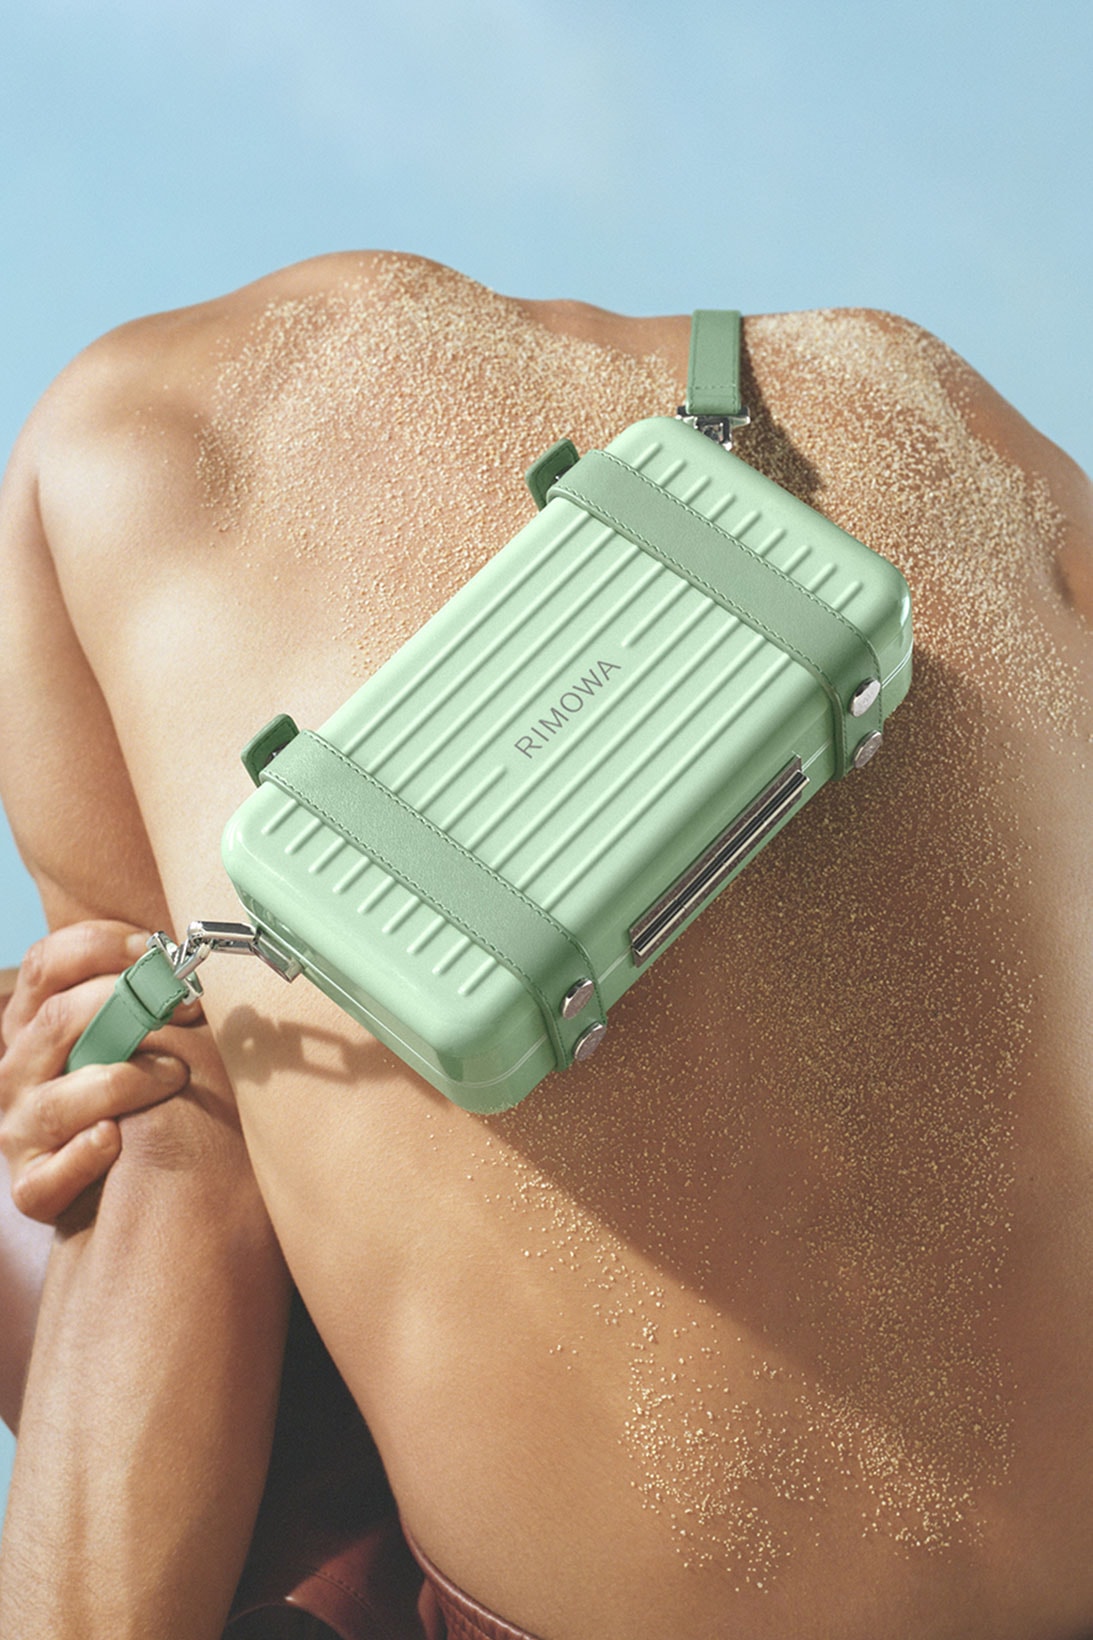 rimowa mango bamboo new colors suitcases personal mint green